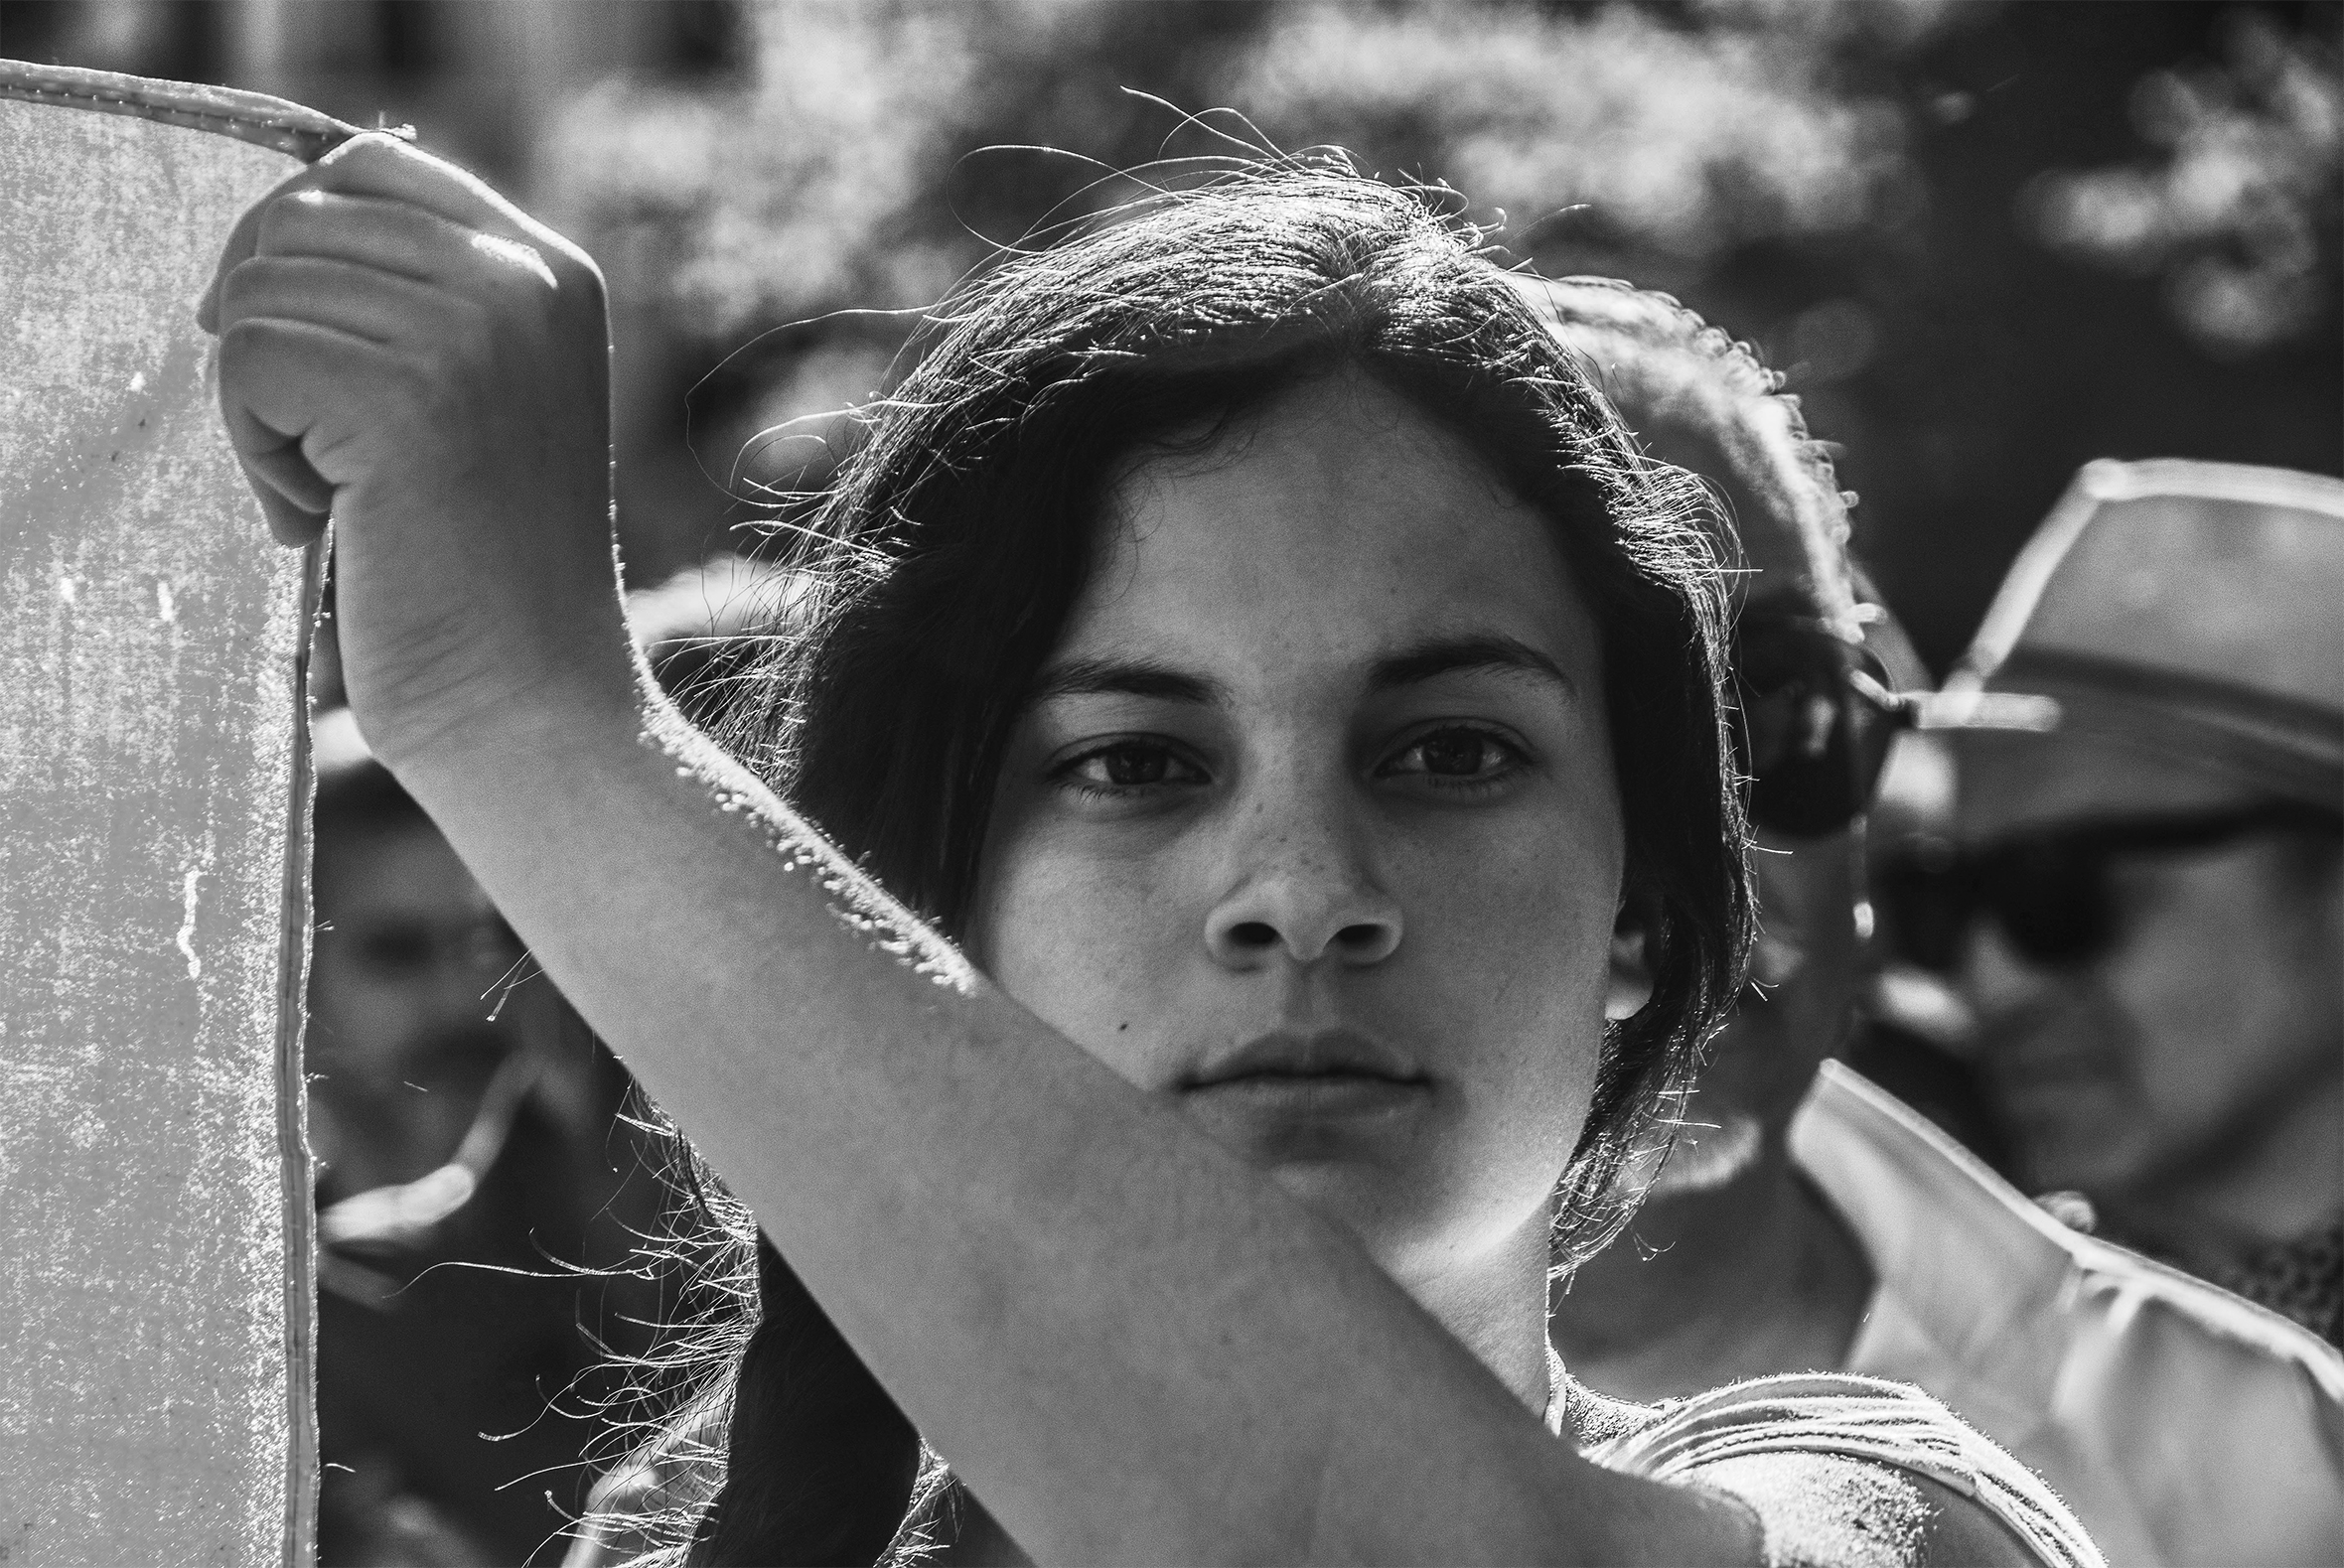 A girl takes part in a Roma community march in Madrid, Spain, May 2019.